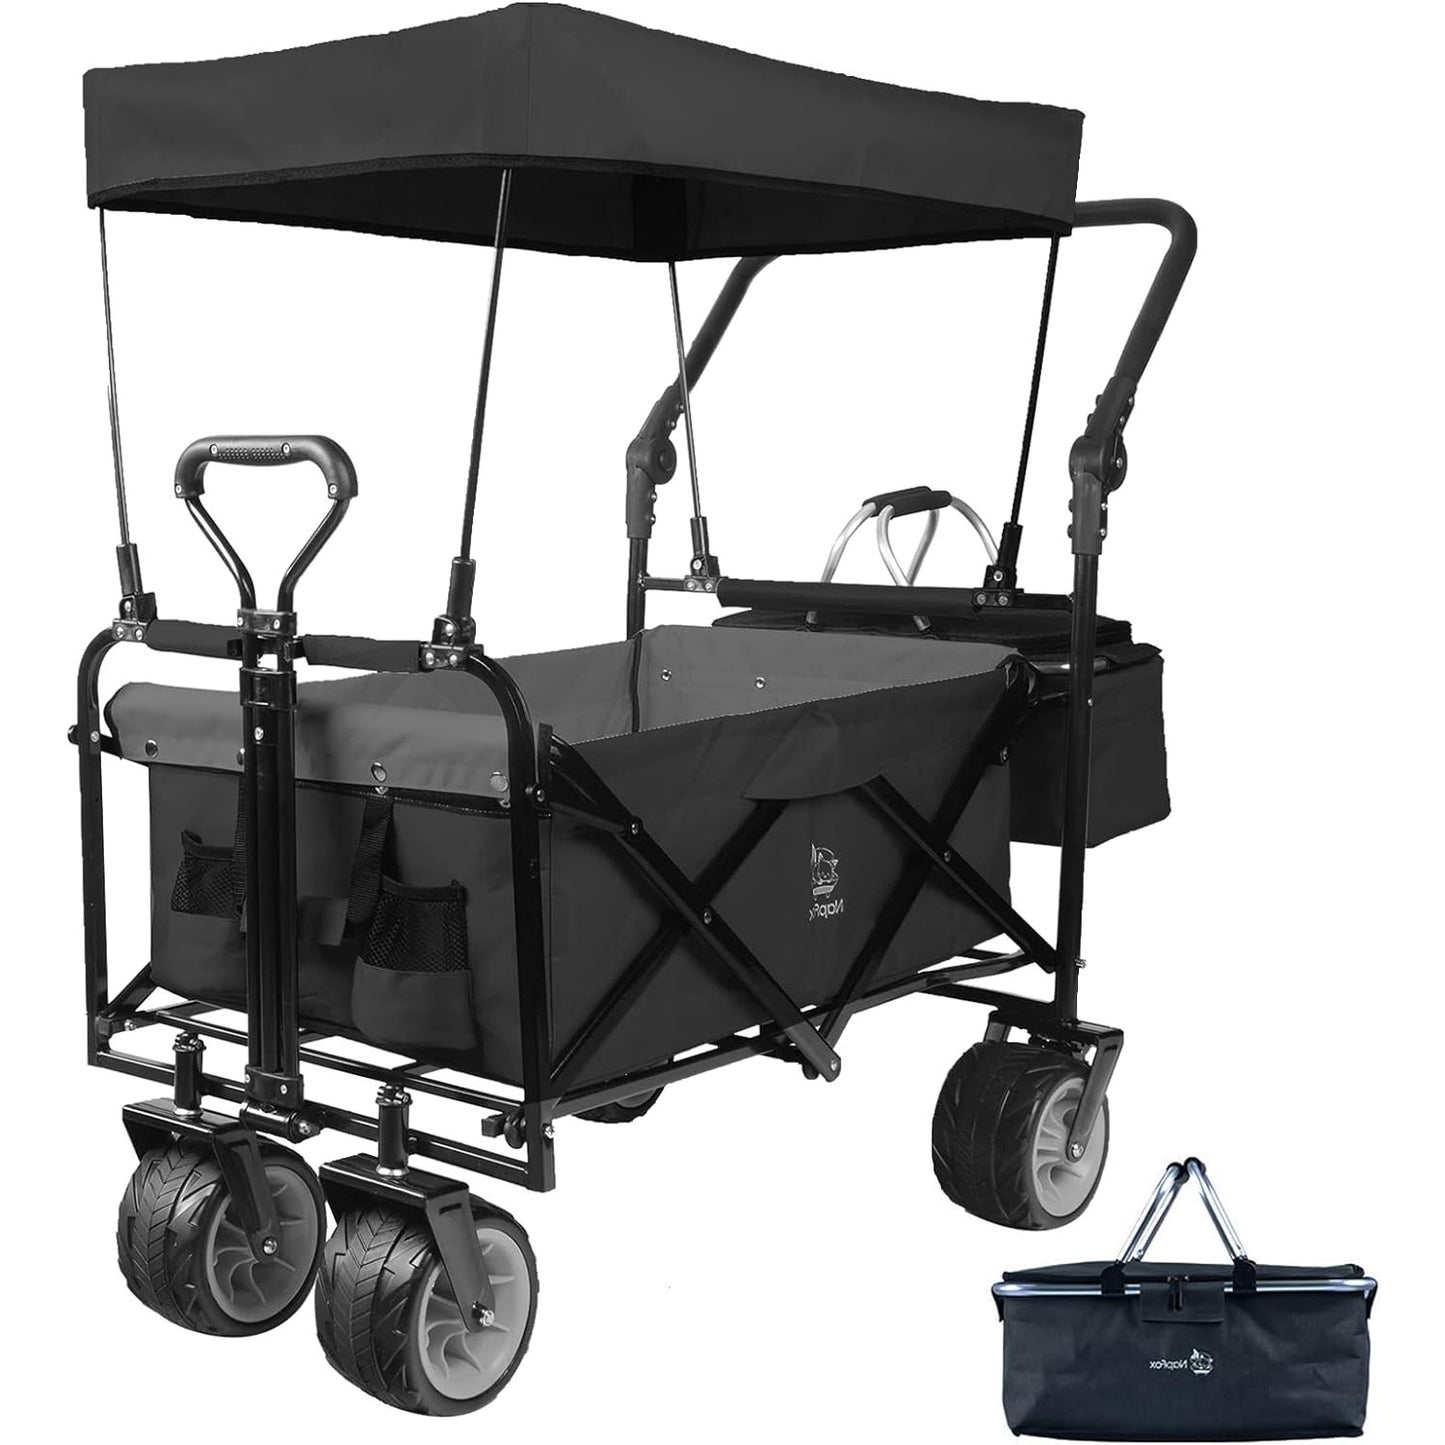 IFAST Collapsible Wagon Heavy Duty Folding Cart with Removable Canopy